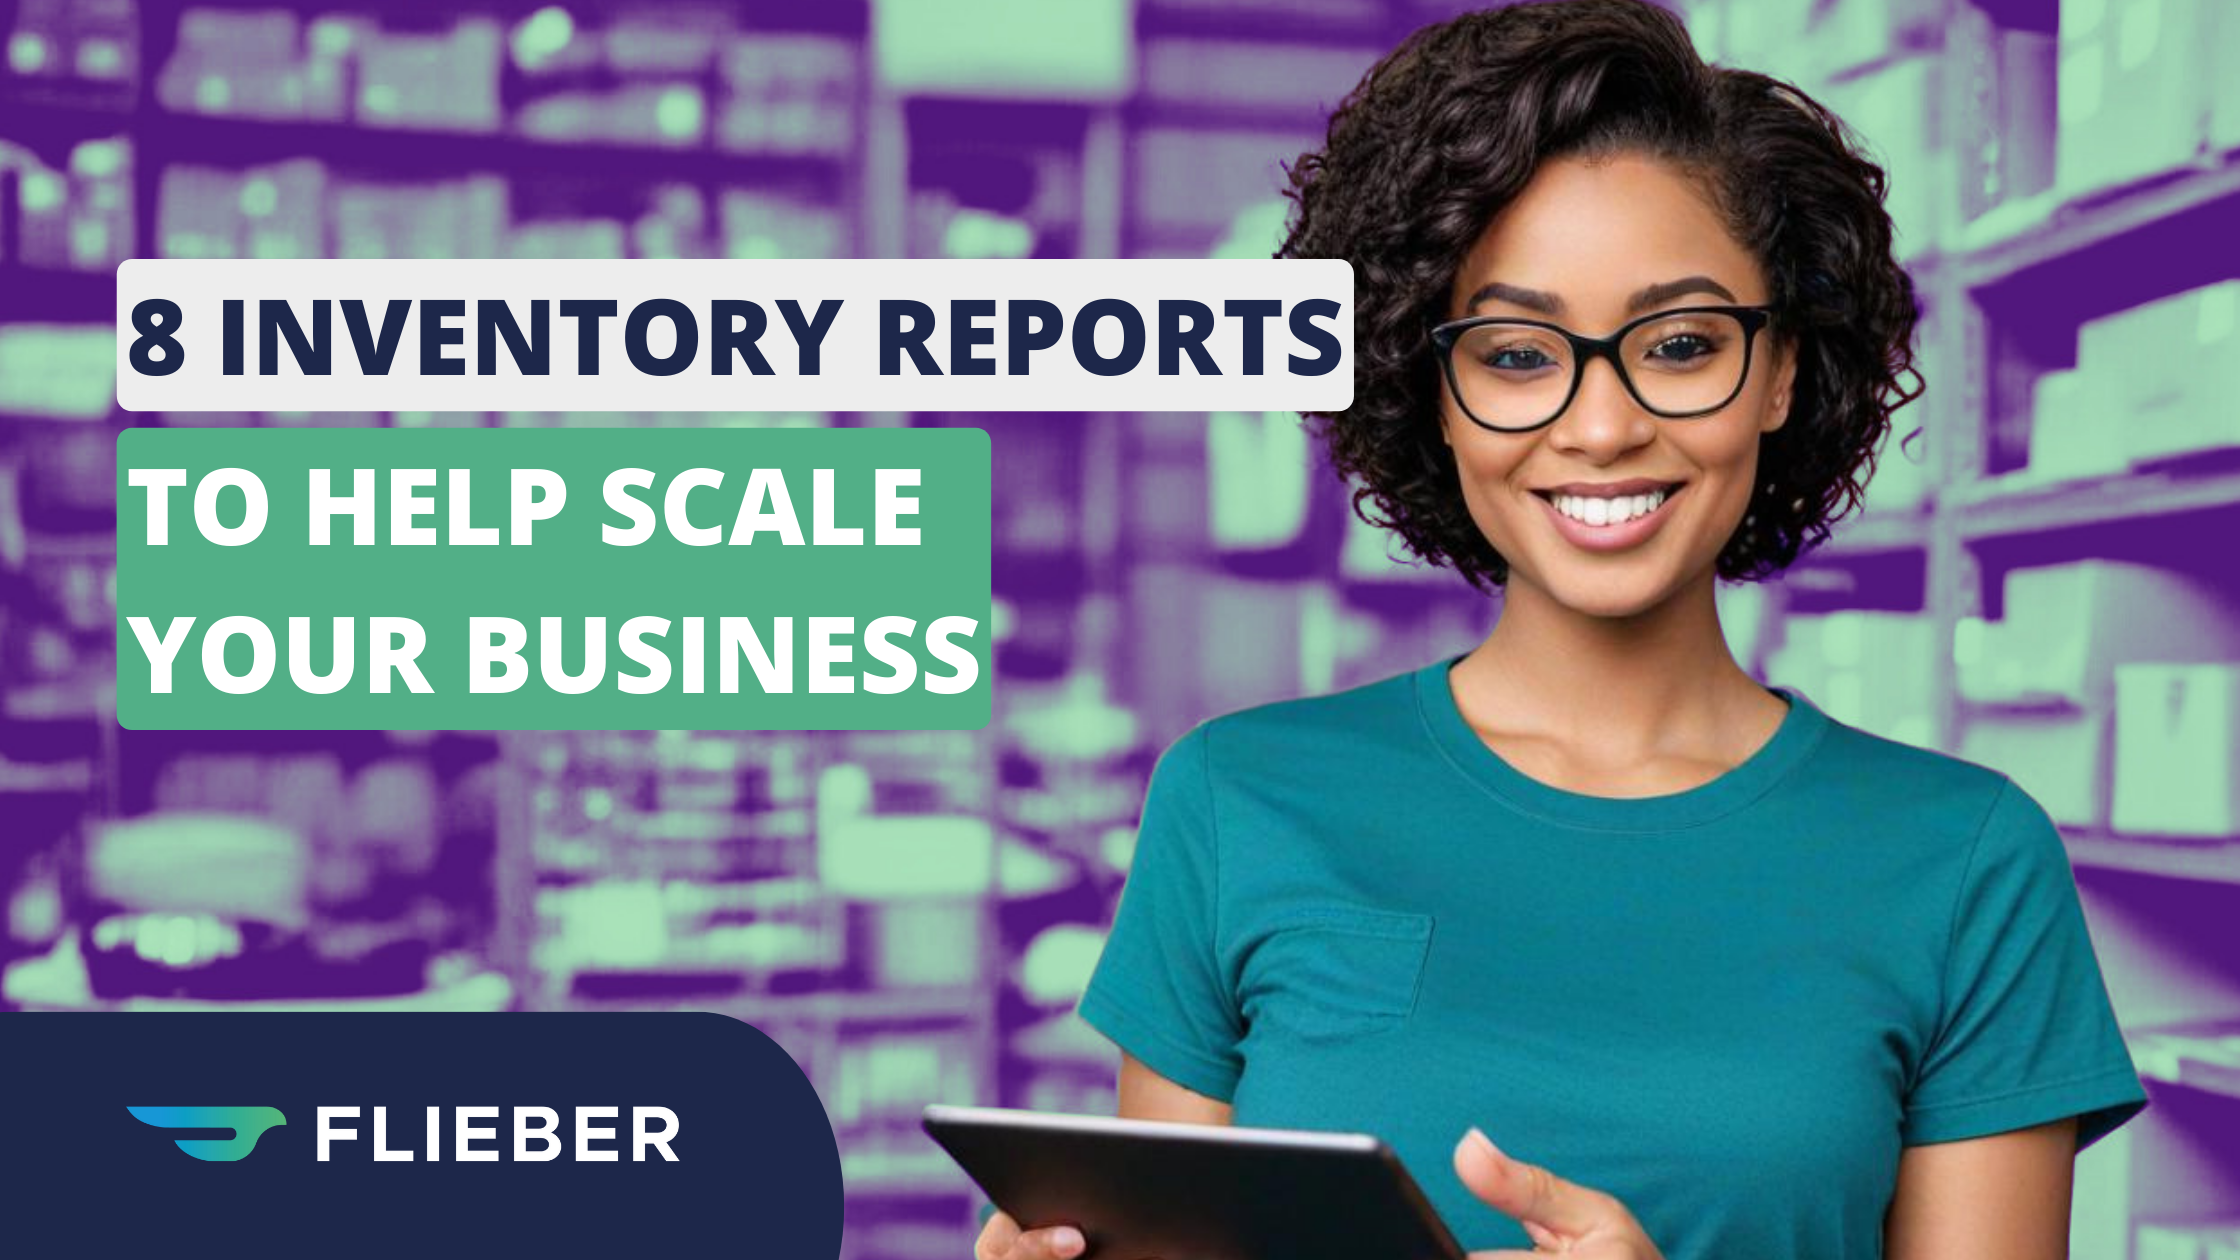 8 Inventory Reports to Help Scale Your Business